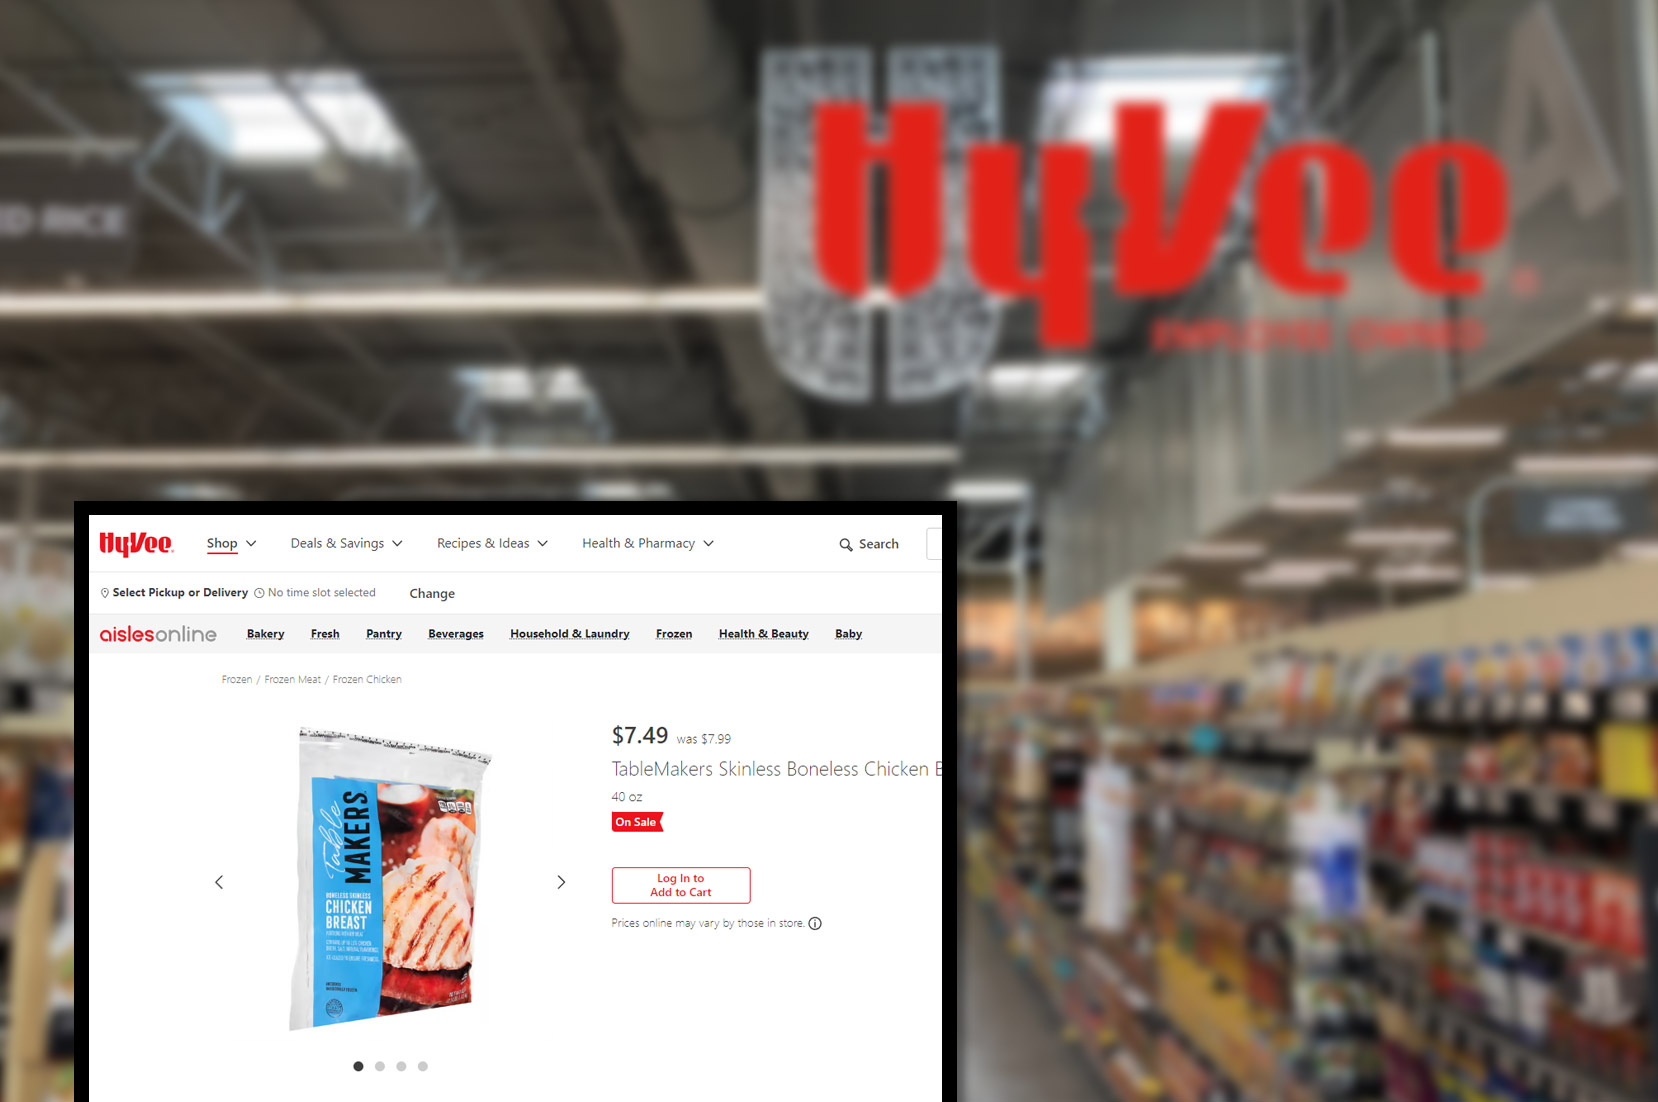 hyvee-usproduct-pricing-information-and-image-scraping-services